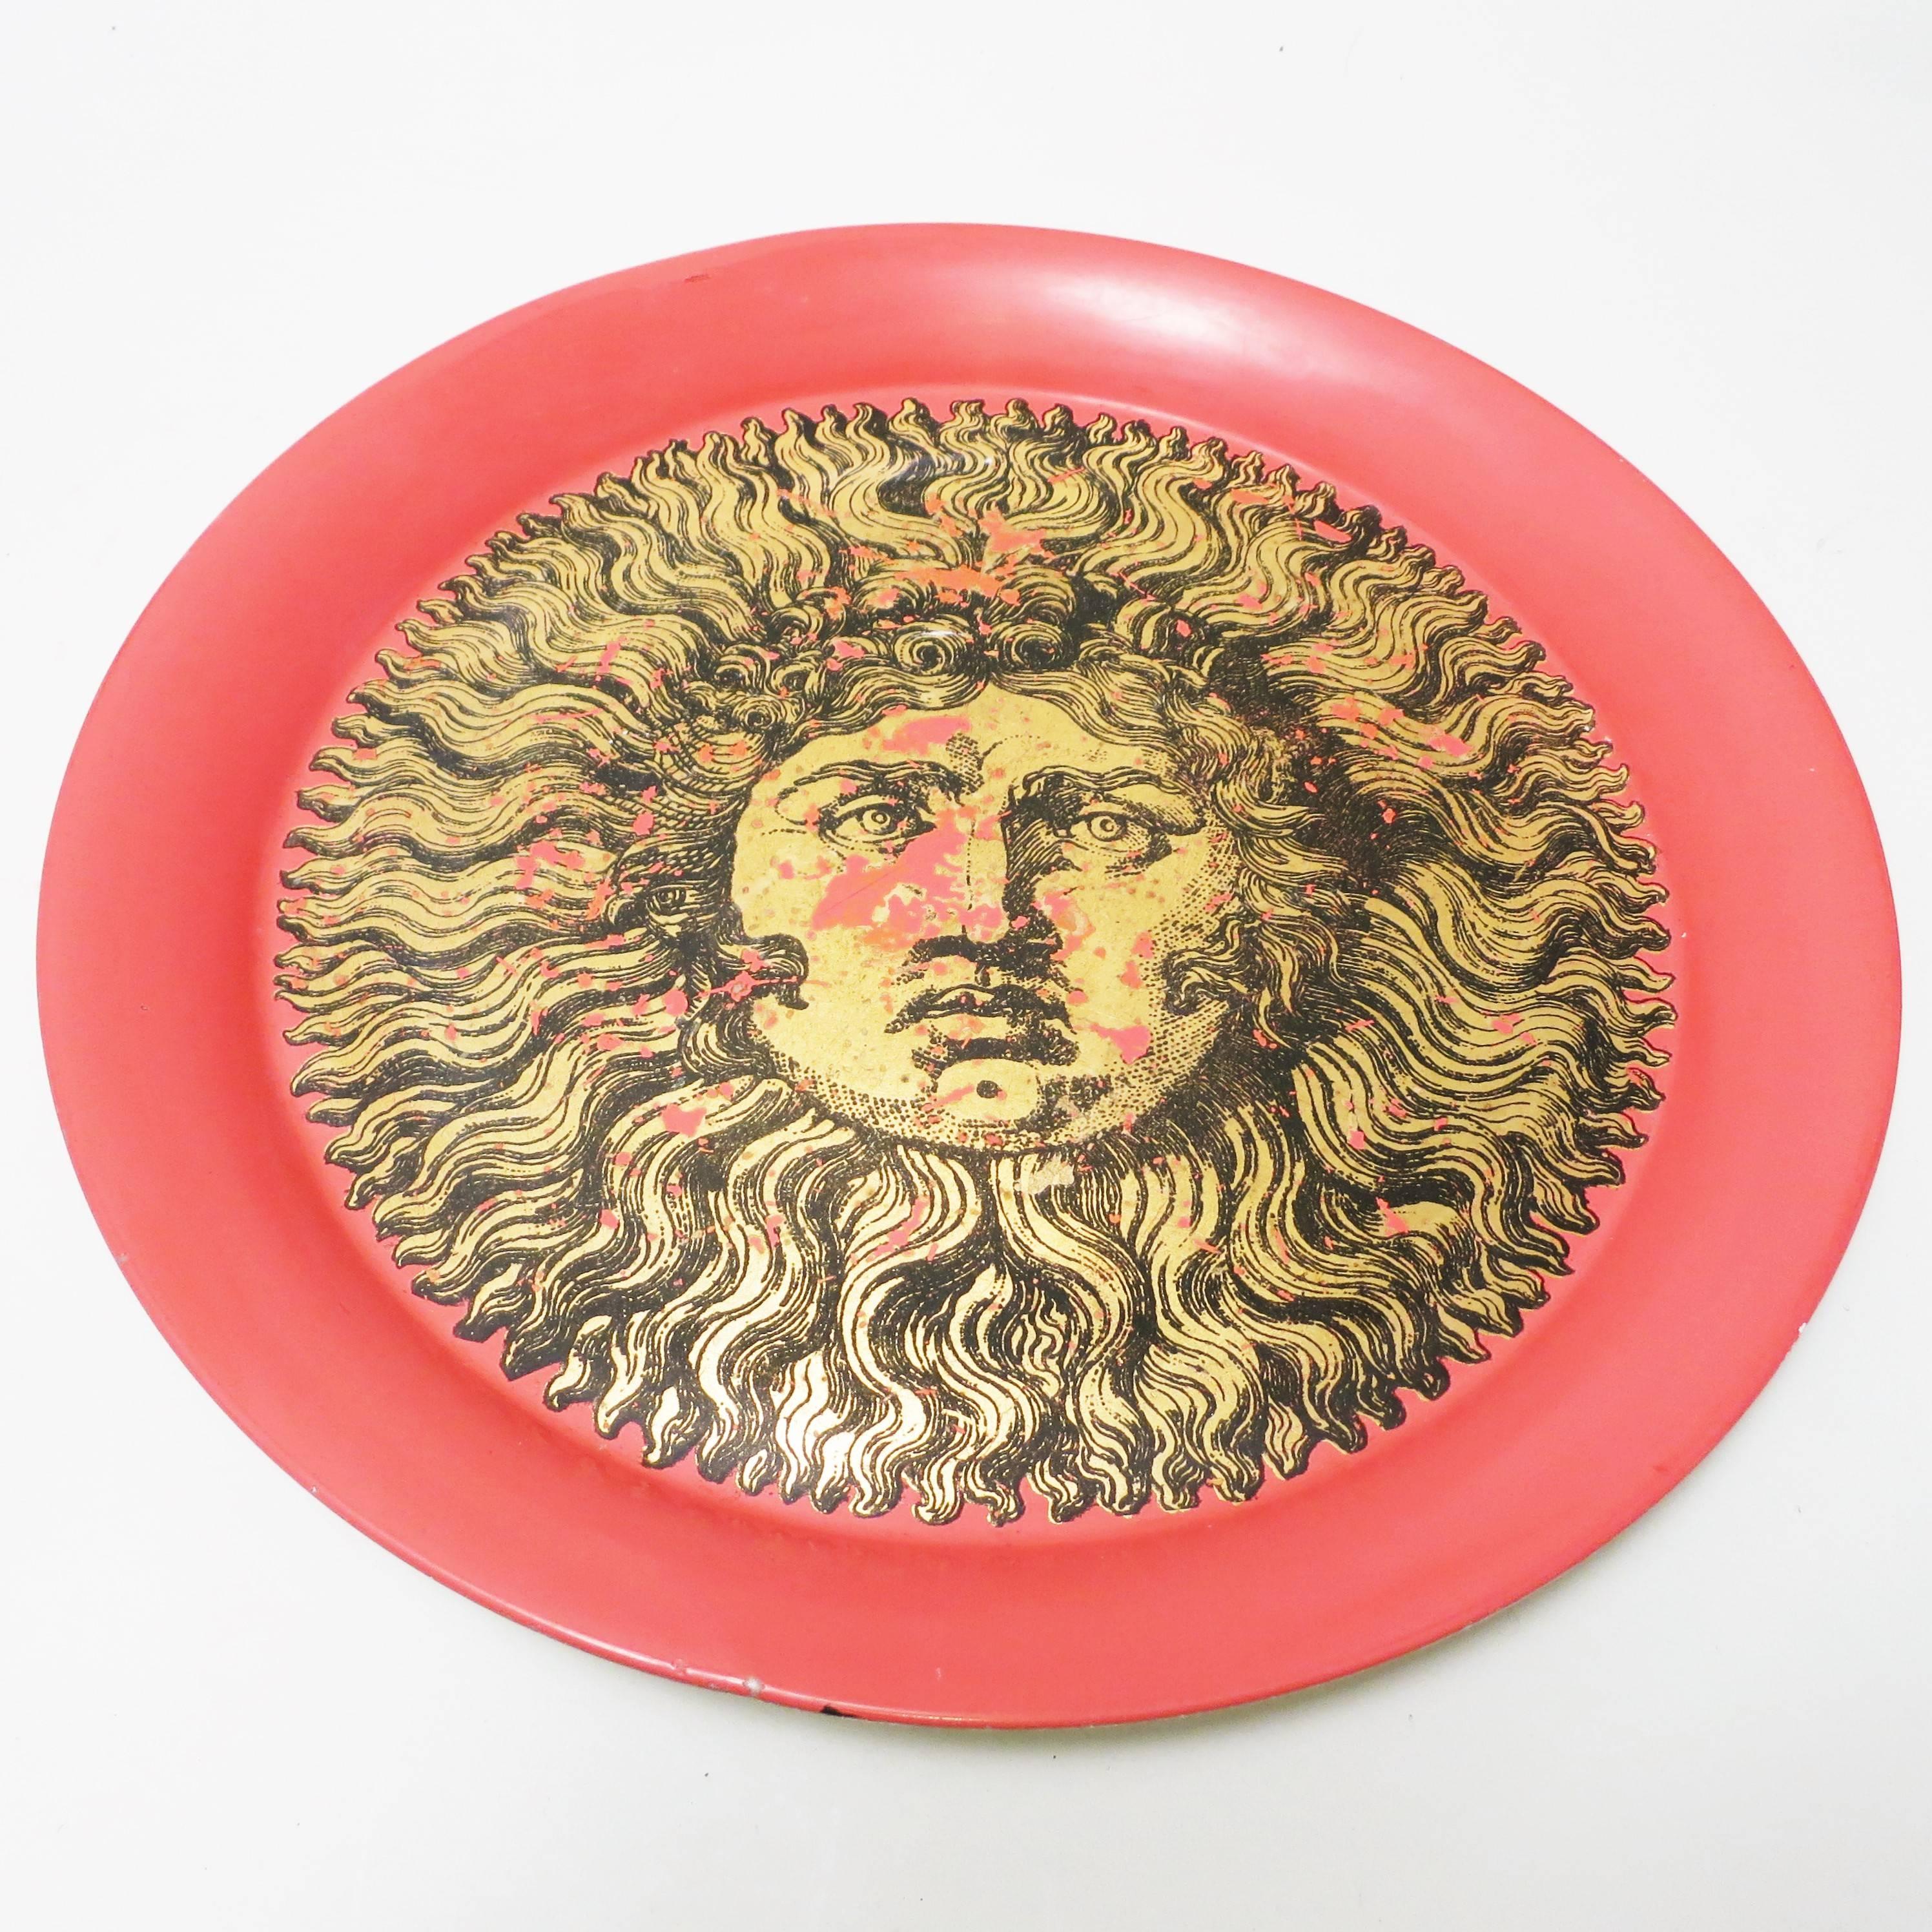 Metal tray with King Sun ‘Sole Ricciuto’ golden and black decoration on a red background
Designed by Piero Fornasetti, and produced by Fornasetti Milano, circa 1950-1960
Labeled by maker on the back side
Some lack of golden decor makes a